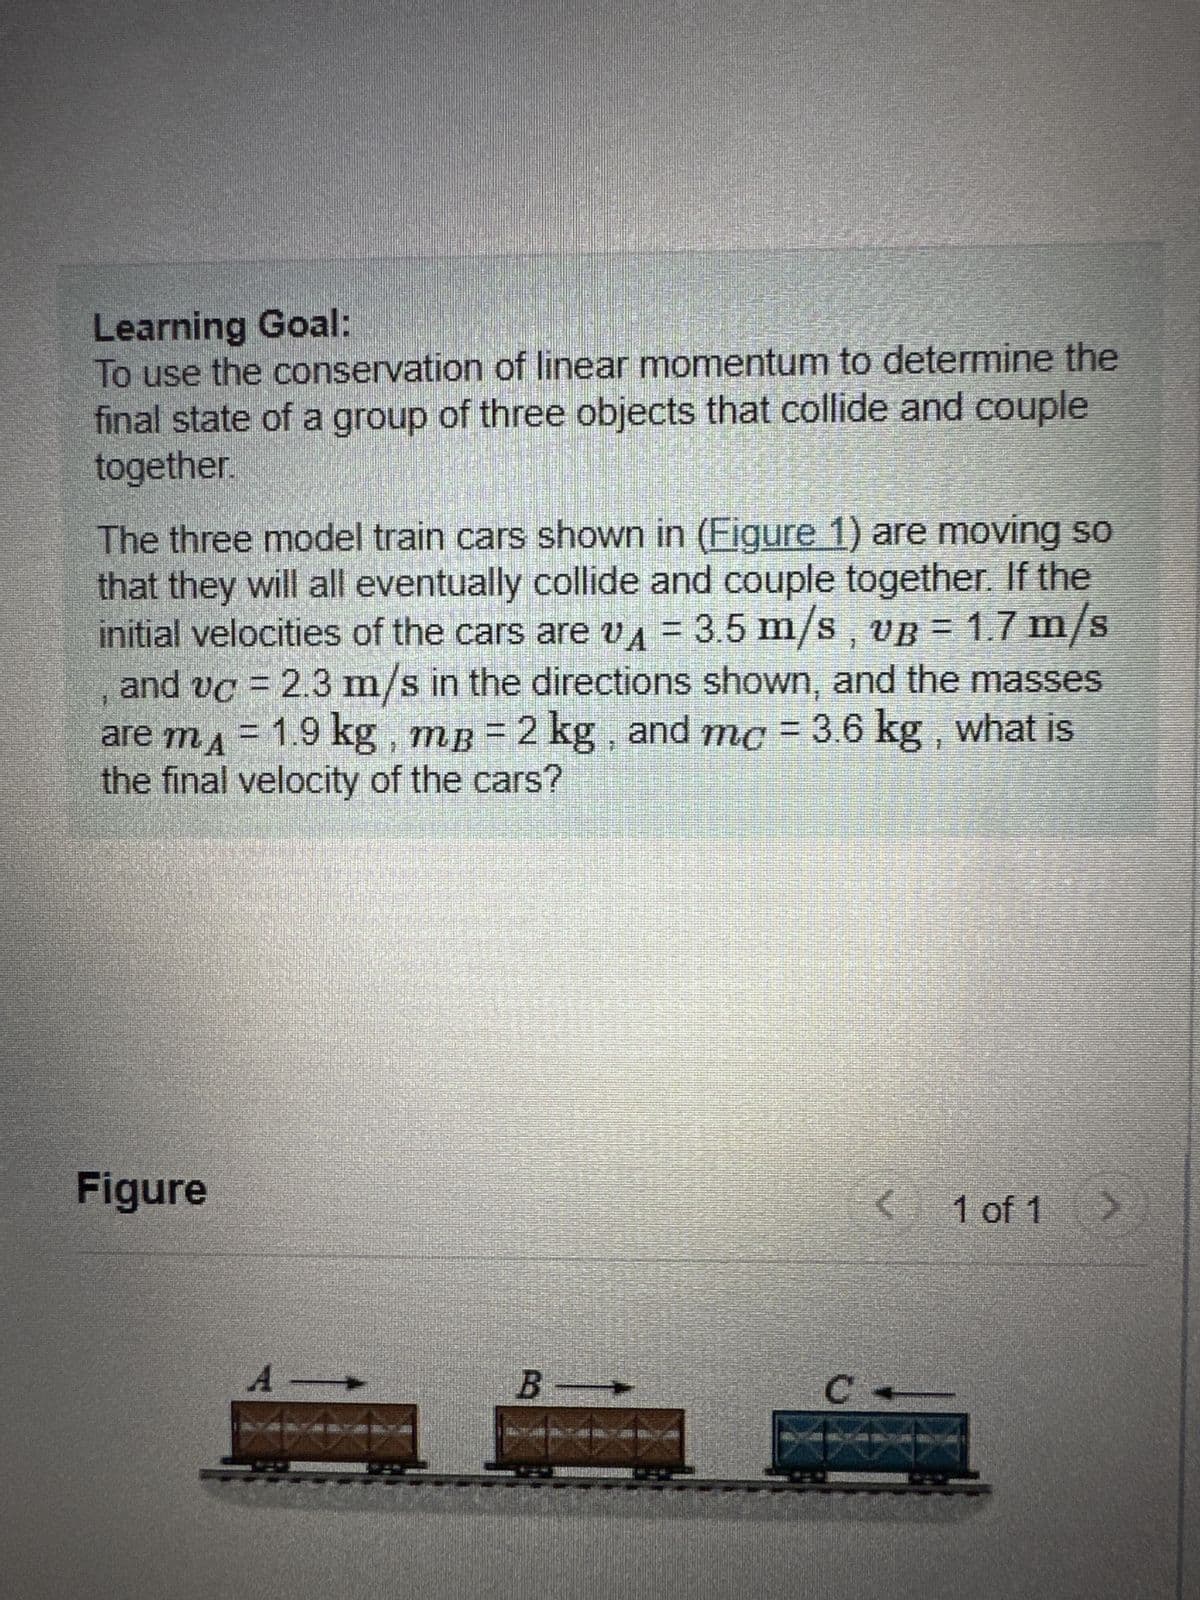 Learning Goal:
To use the conservation of linear momentum to determine the
final state of a group of three objects that collide and couple
together.
The three model train cars shown in (Figure 1) are moving so
that they will all eventually collide and couple together. If the
initial velocities of the cars are vA = 3.5 m/s, vB = 1.7 m/s
and vc = 2.3 m/s in the directions shown, and the masses
are m₁ = 1.9 kg, mß = 2 kg, and mc = 3.6 kg, what is
the final velocity of the cars?
Figure
A
B
C
ANCIEM!
< 1 of 1
>